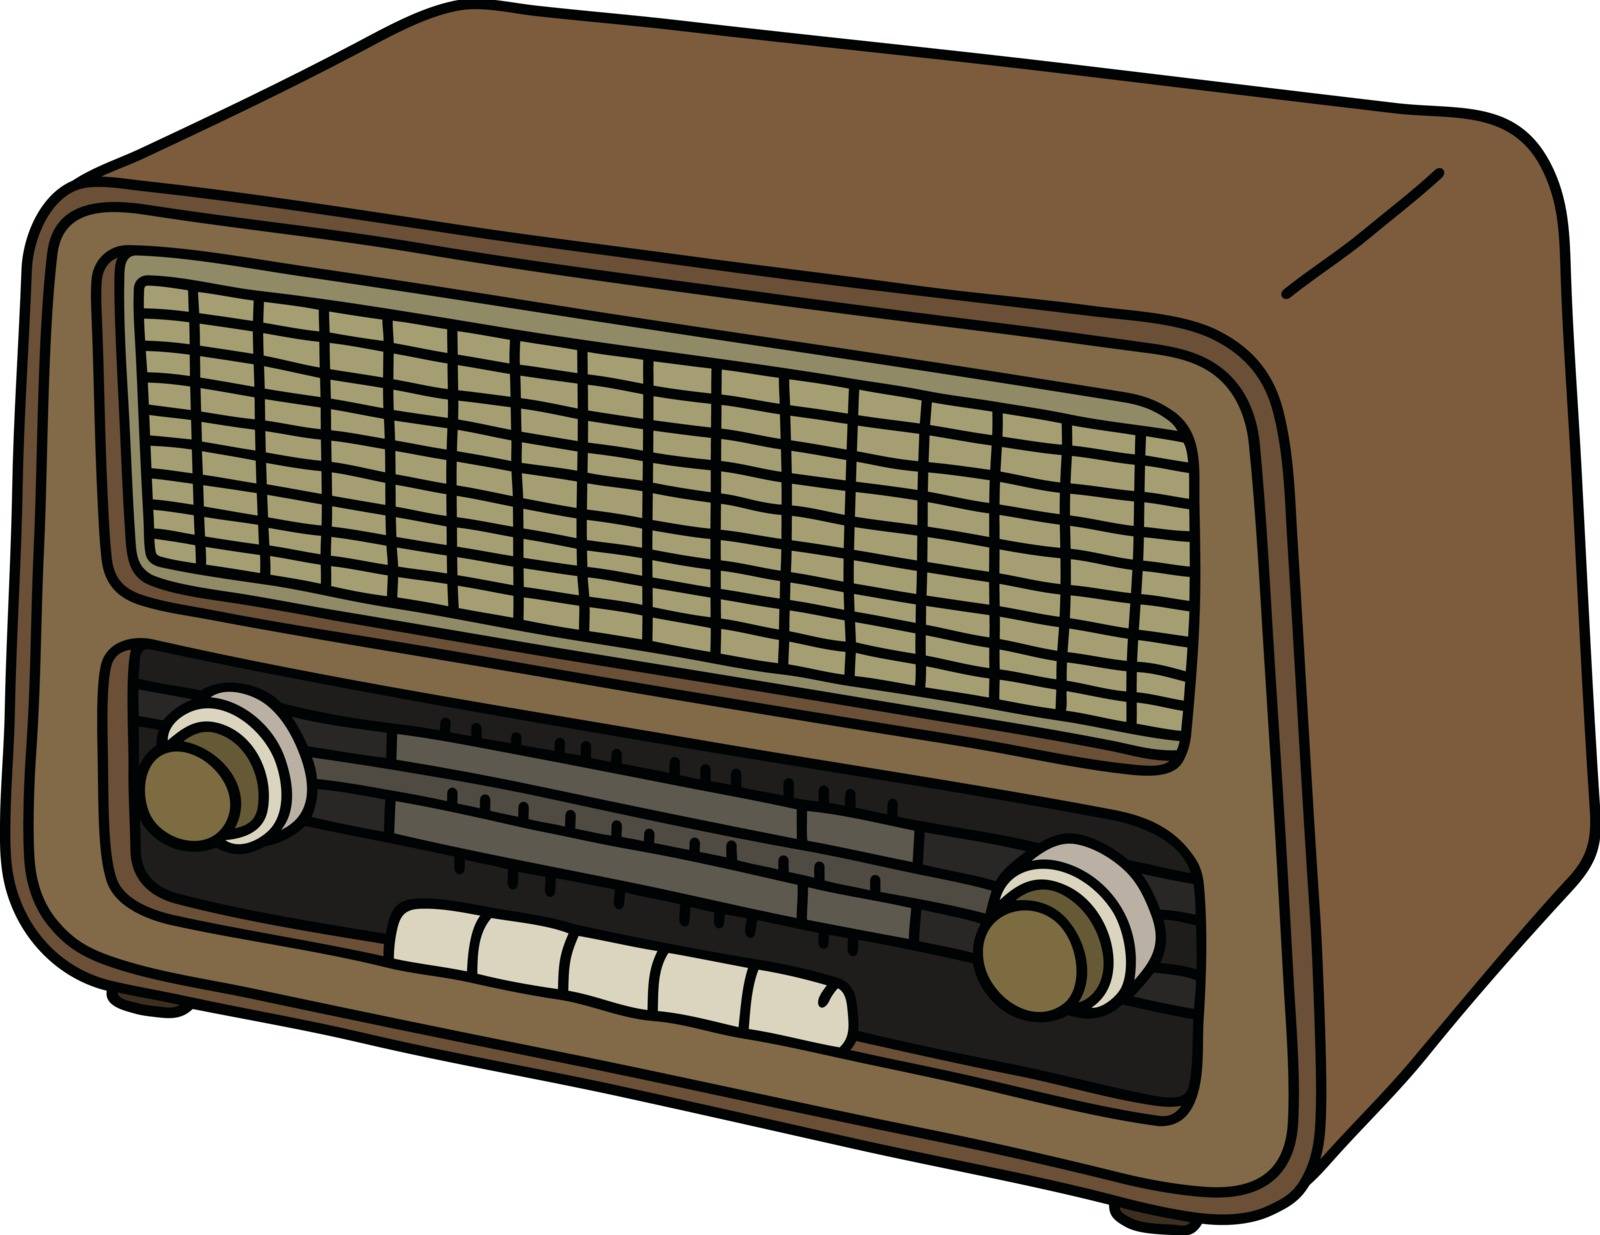 The old radio by vostal